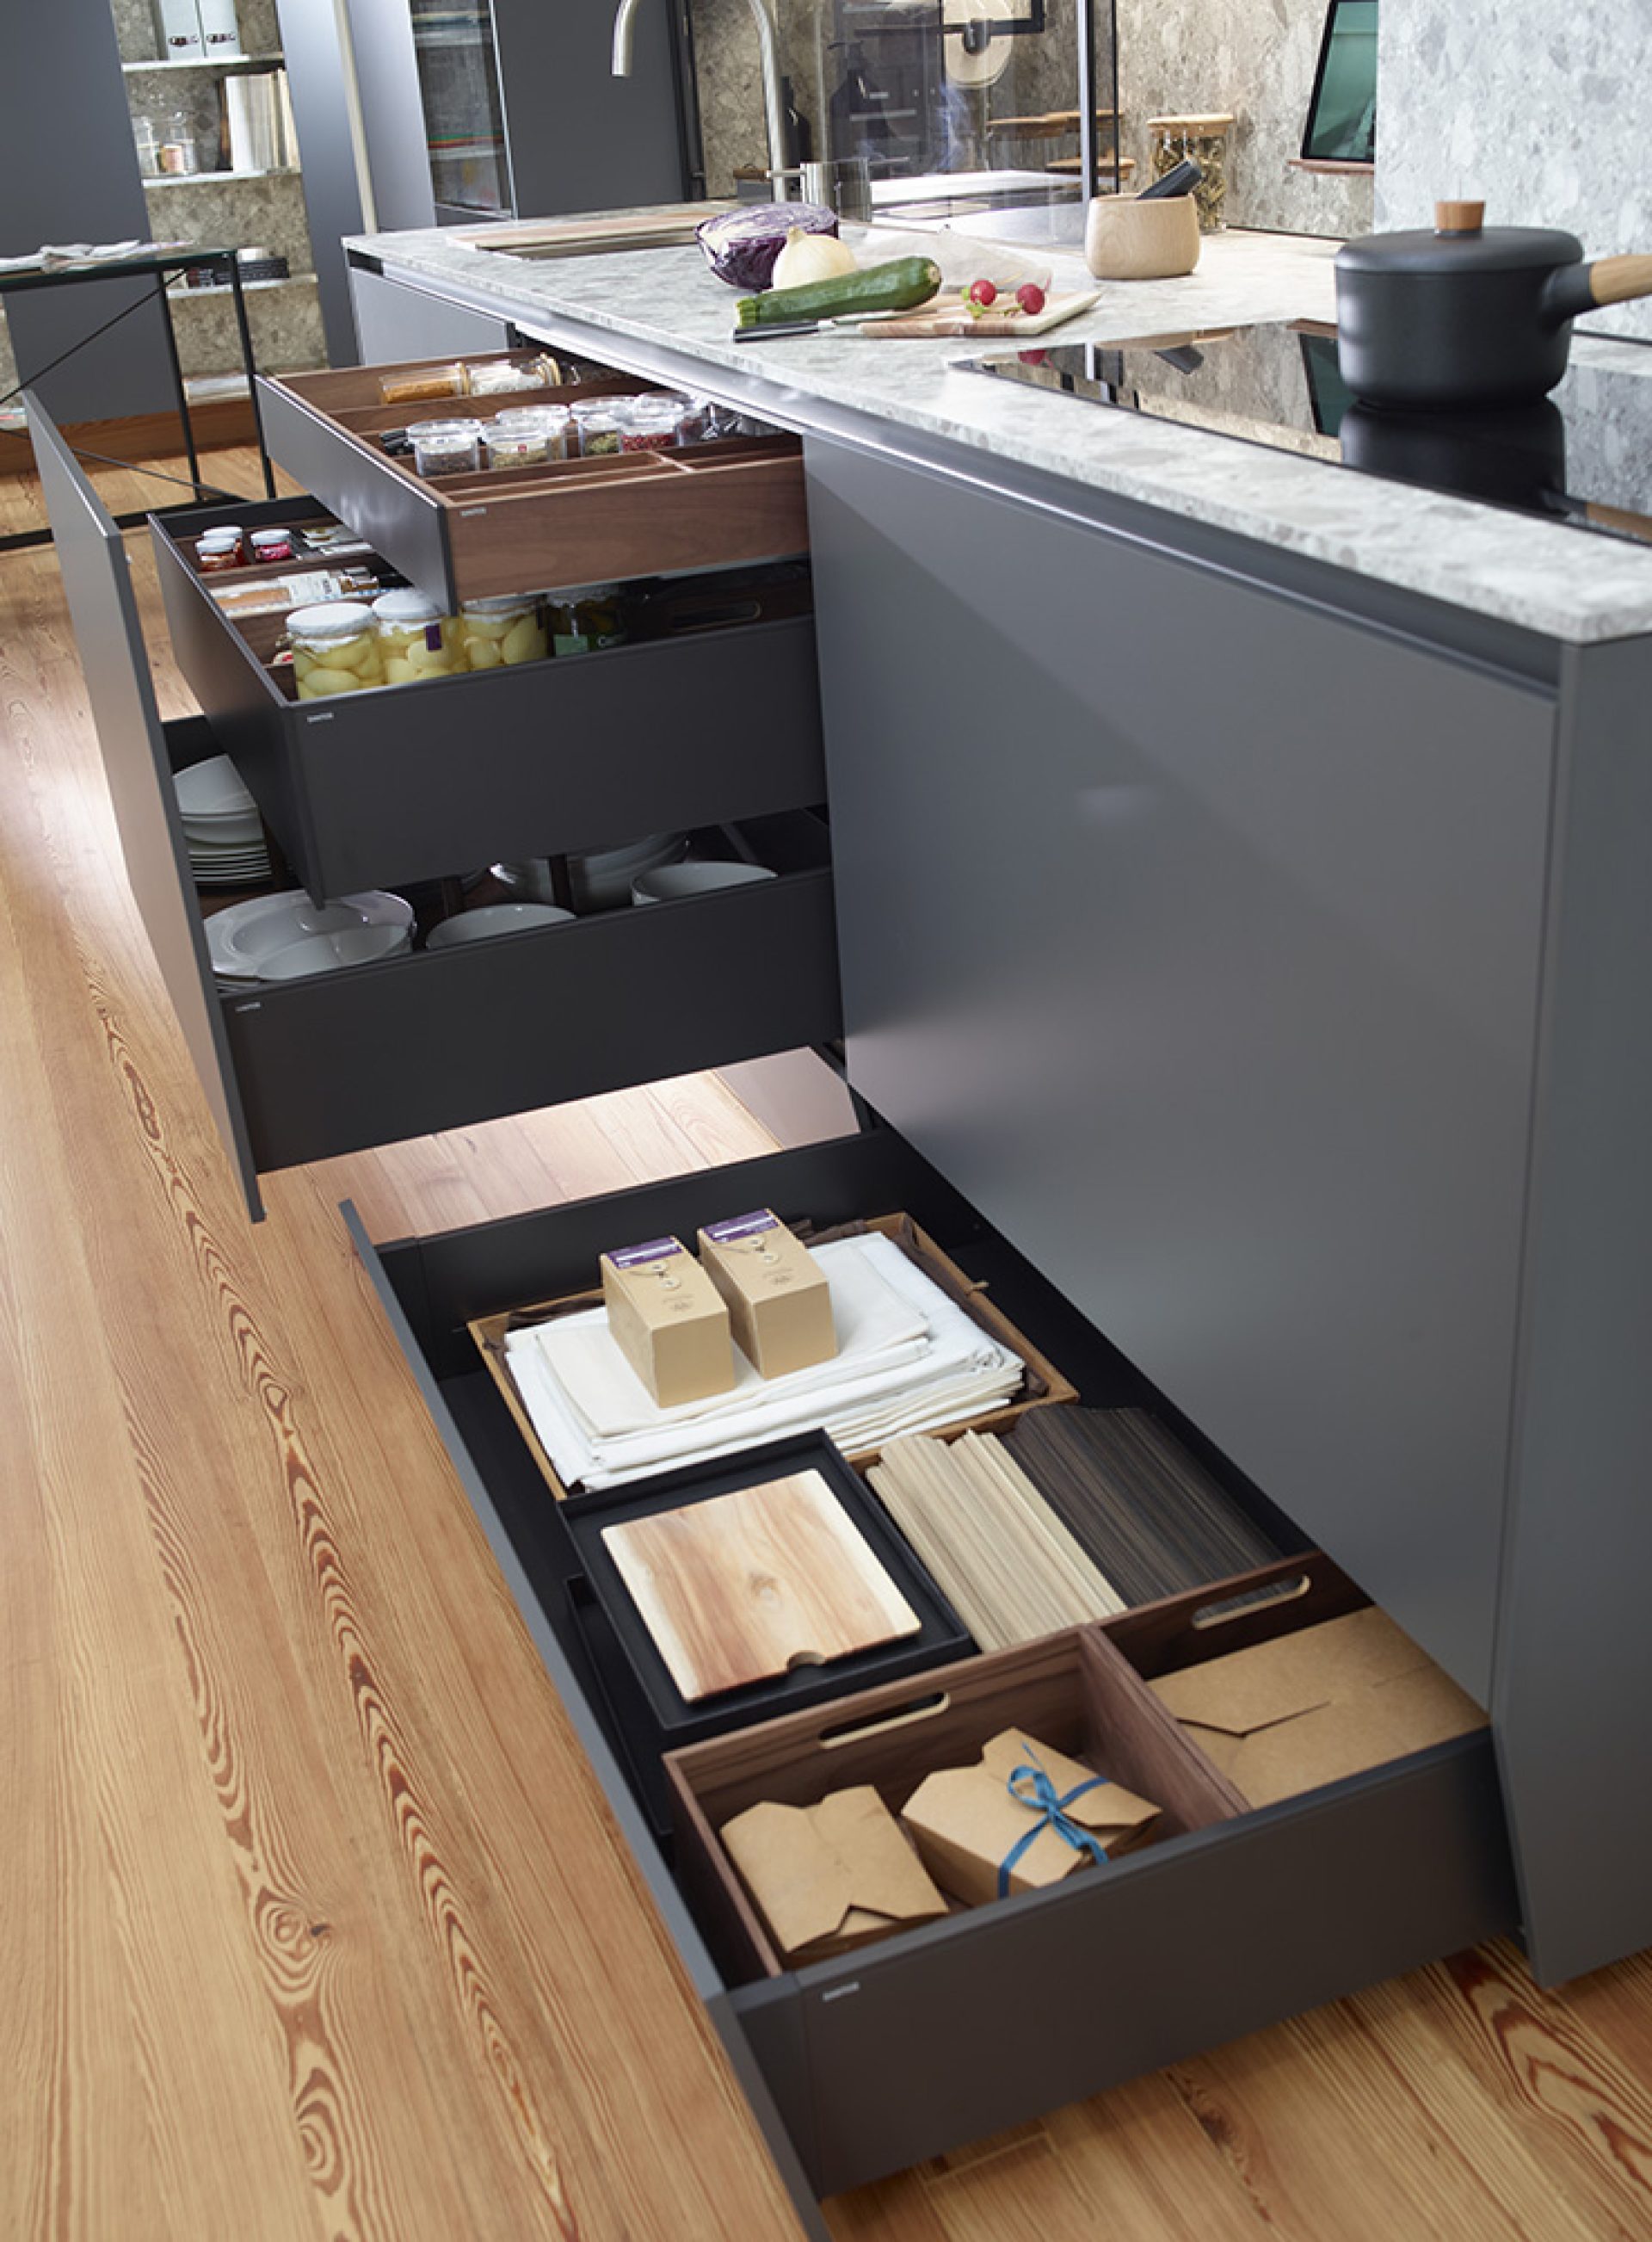 Image of kitchen base units with plinth drawers and organization boxes